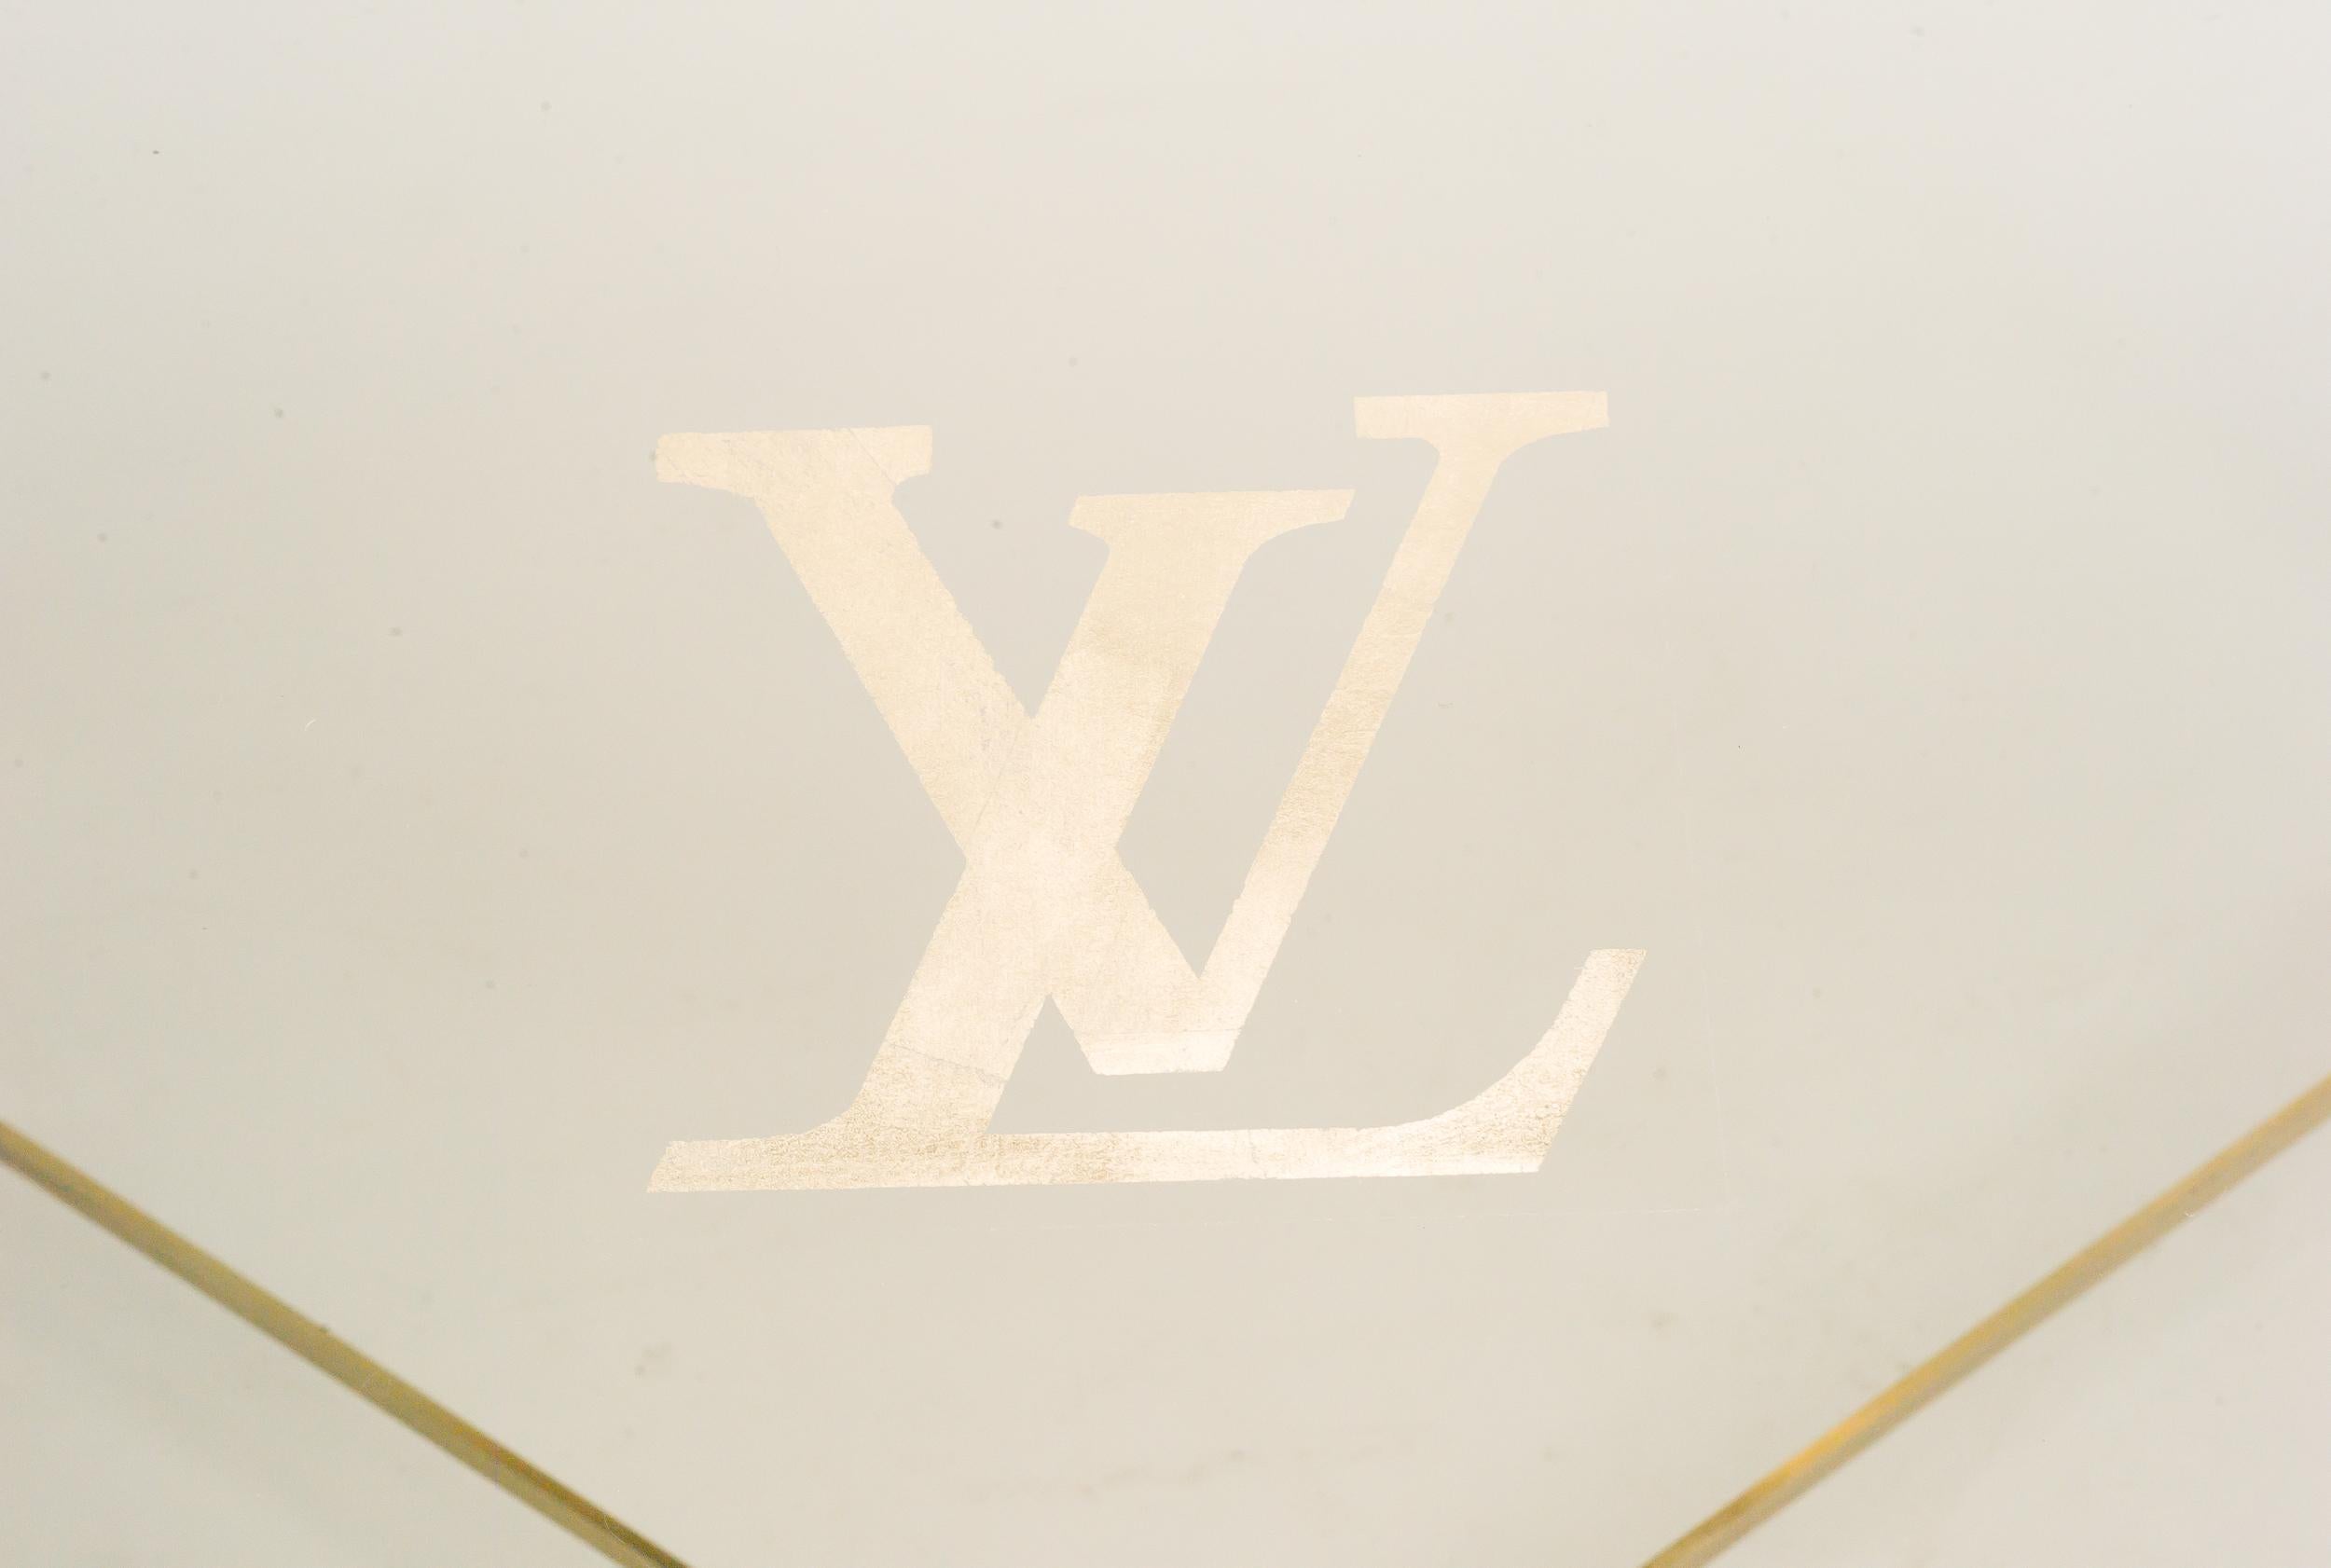 Display table with gold Louis Vuitton monogram. 
This was a display table for the Louis Vuitton presentation at Harrods in London many years ago. 
Brass frame, stained glass top with gold LV logo. 
Very distinctive piece.